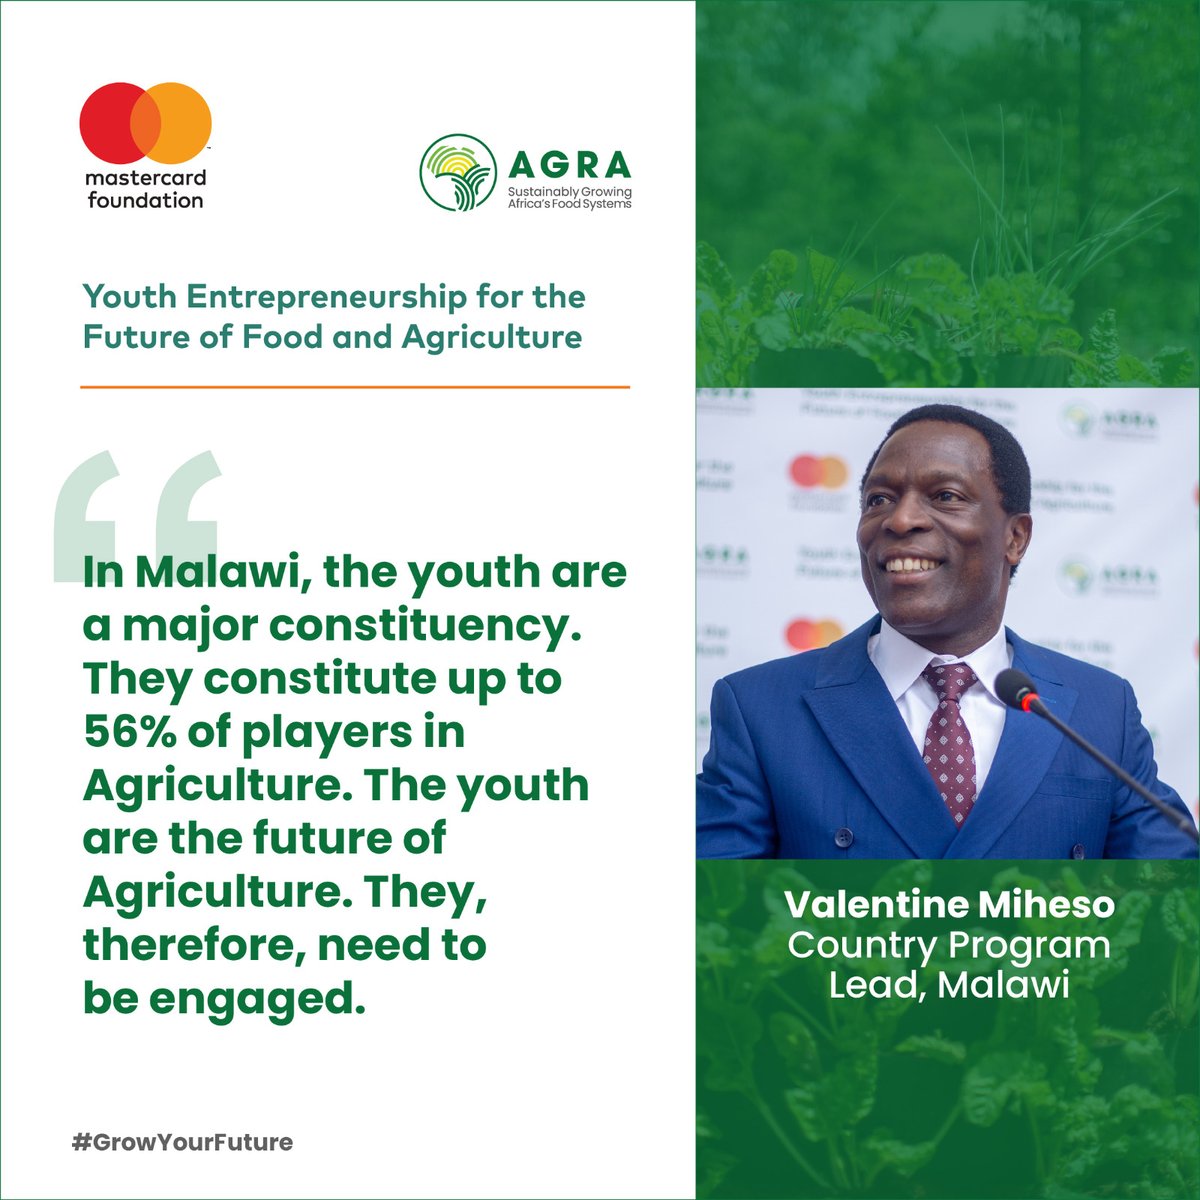 Food Systems | #YouthandFoodSystems 'In Malawi, the youth are a major constituency. They are the future of Agriculture therefore, they need to be engaged.' Valentine Miheso, Country Program Lead, Malawi.